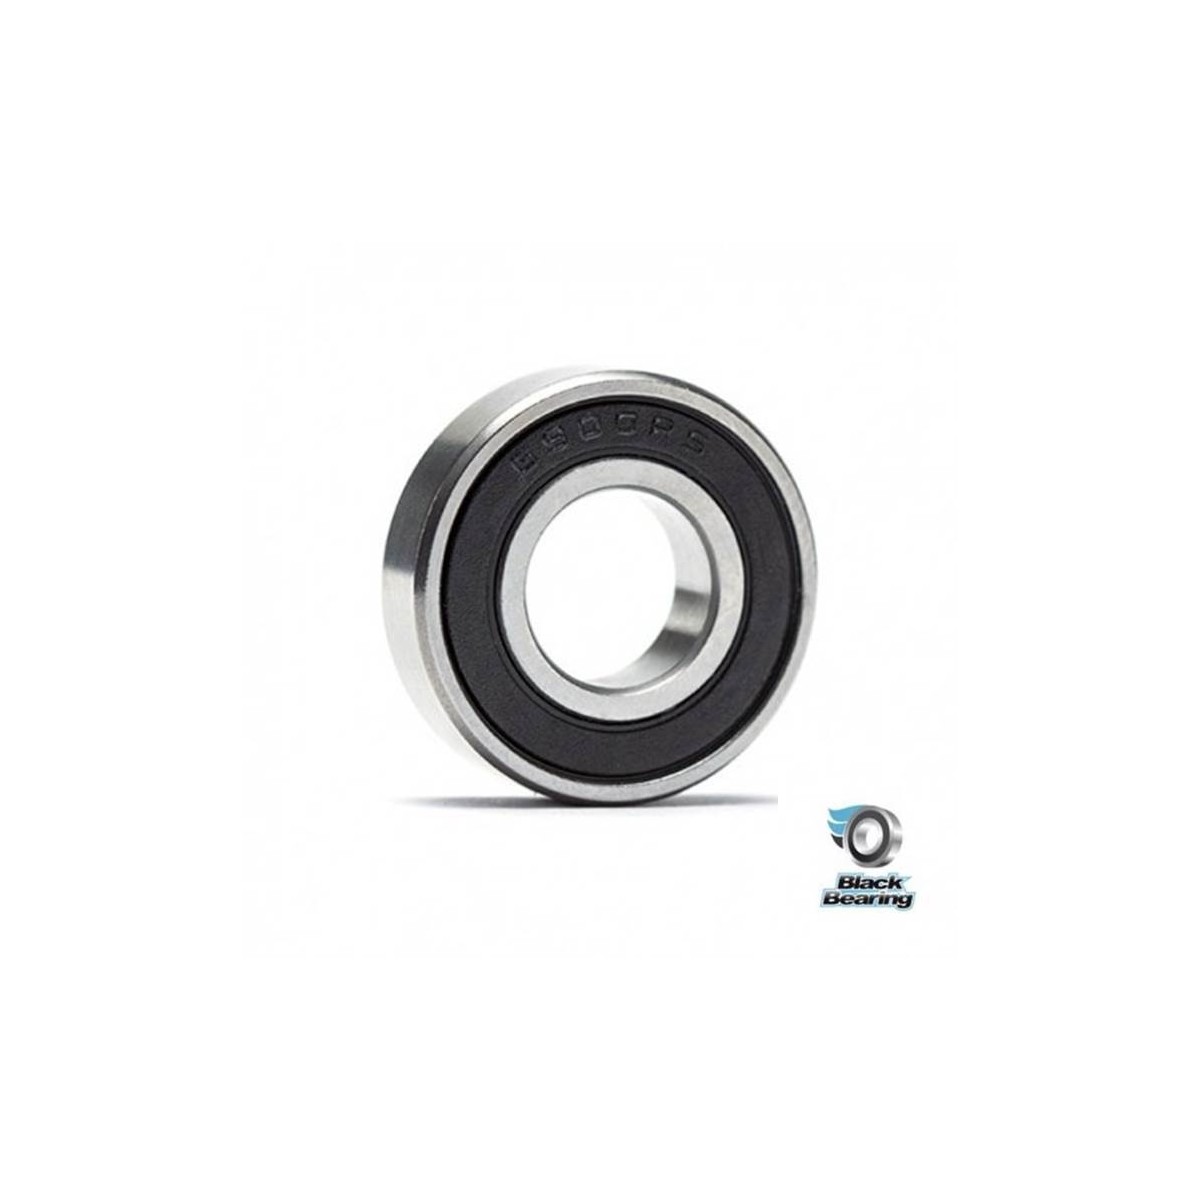 BLACK BEARING B3 roulement 20x32x7 roulement 6804-2RS bearing - NEUF